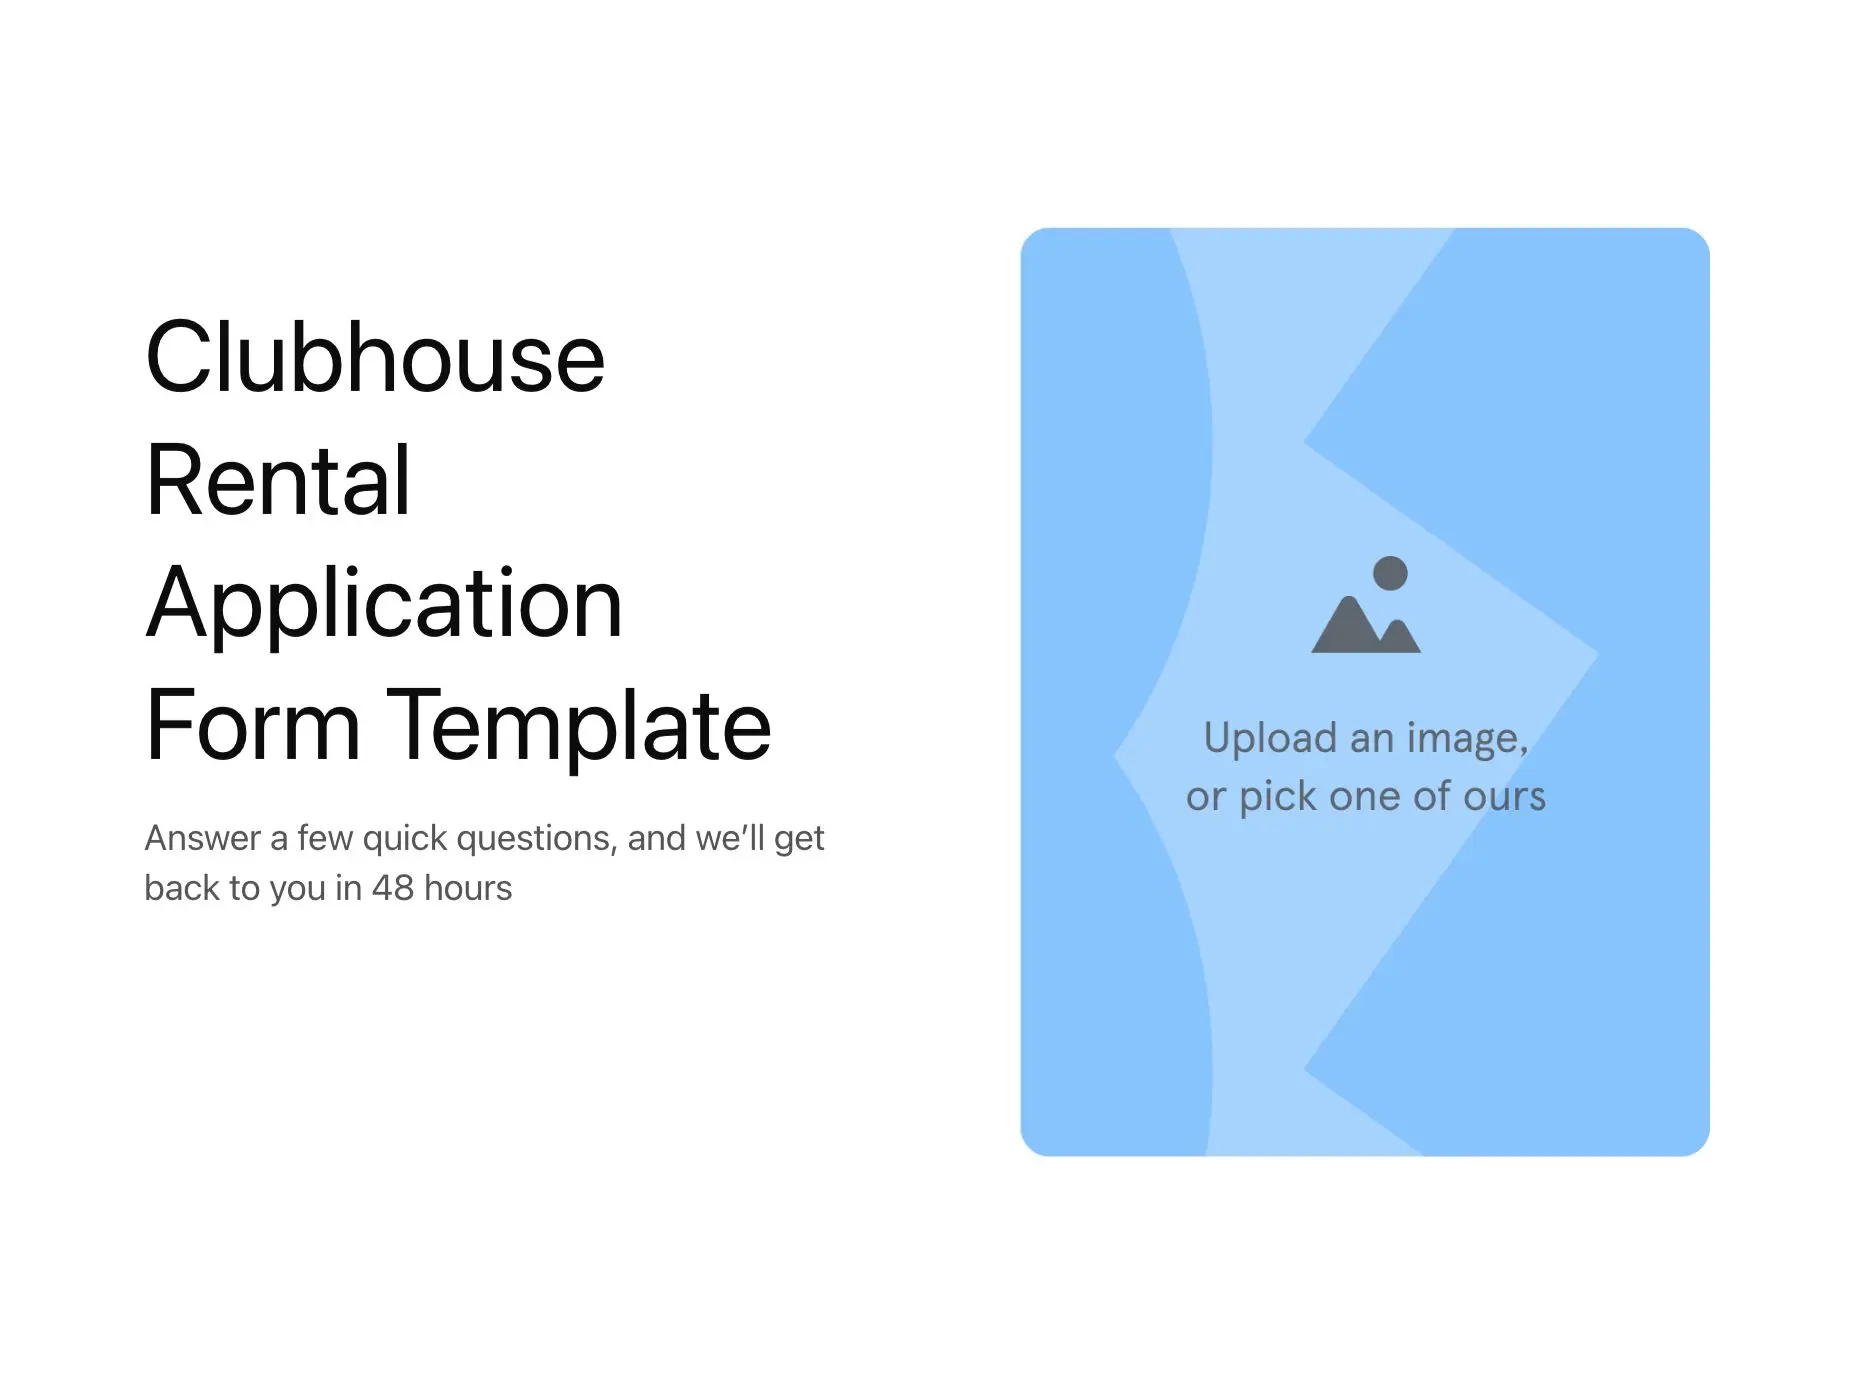 Clubhouse Rental Application Form Template Hero